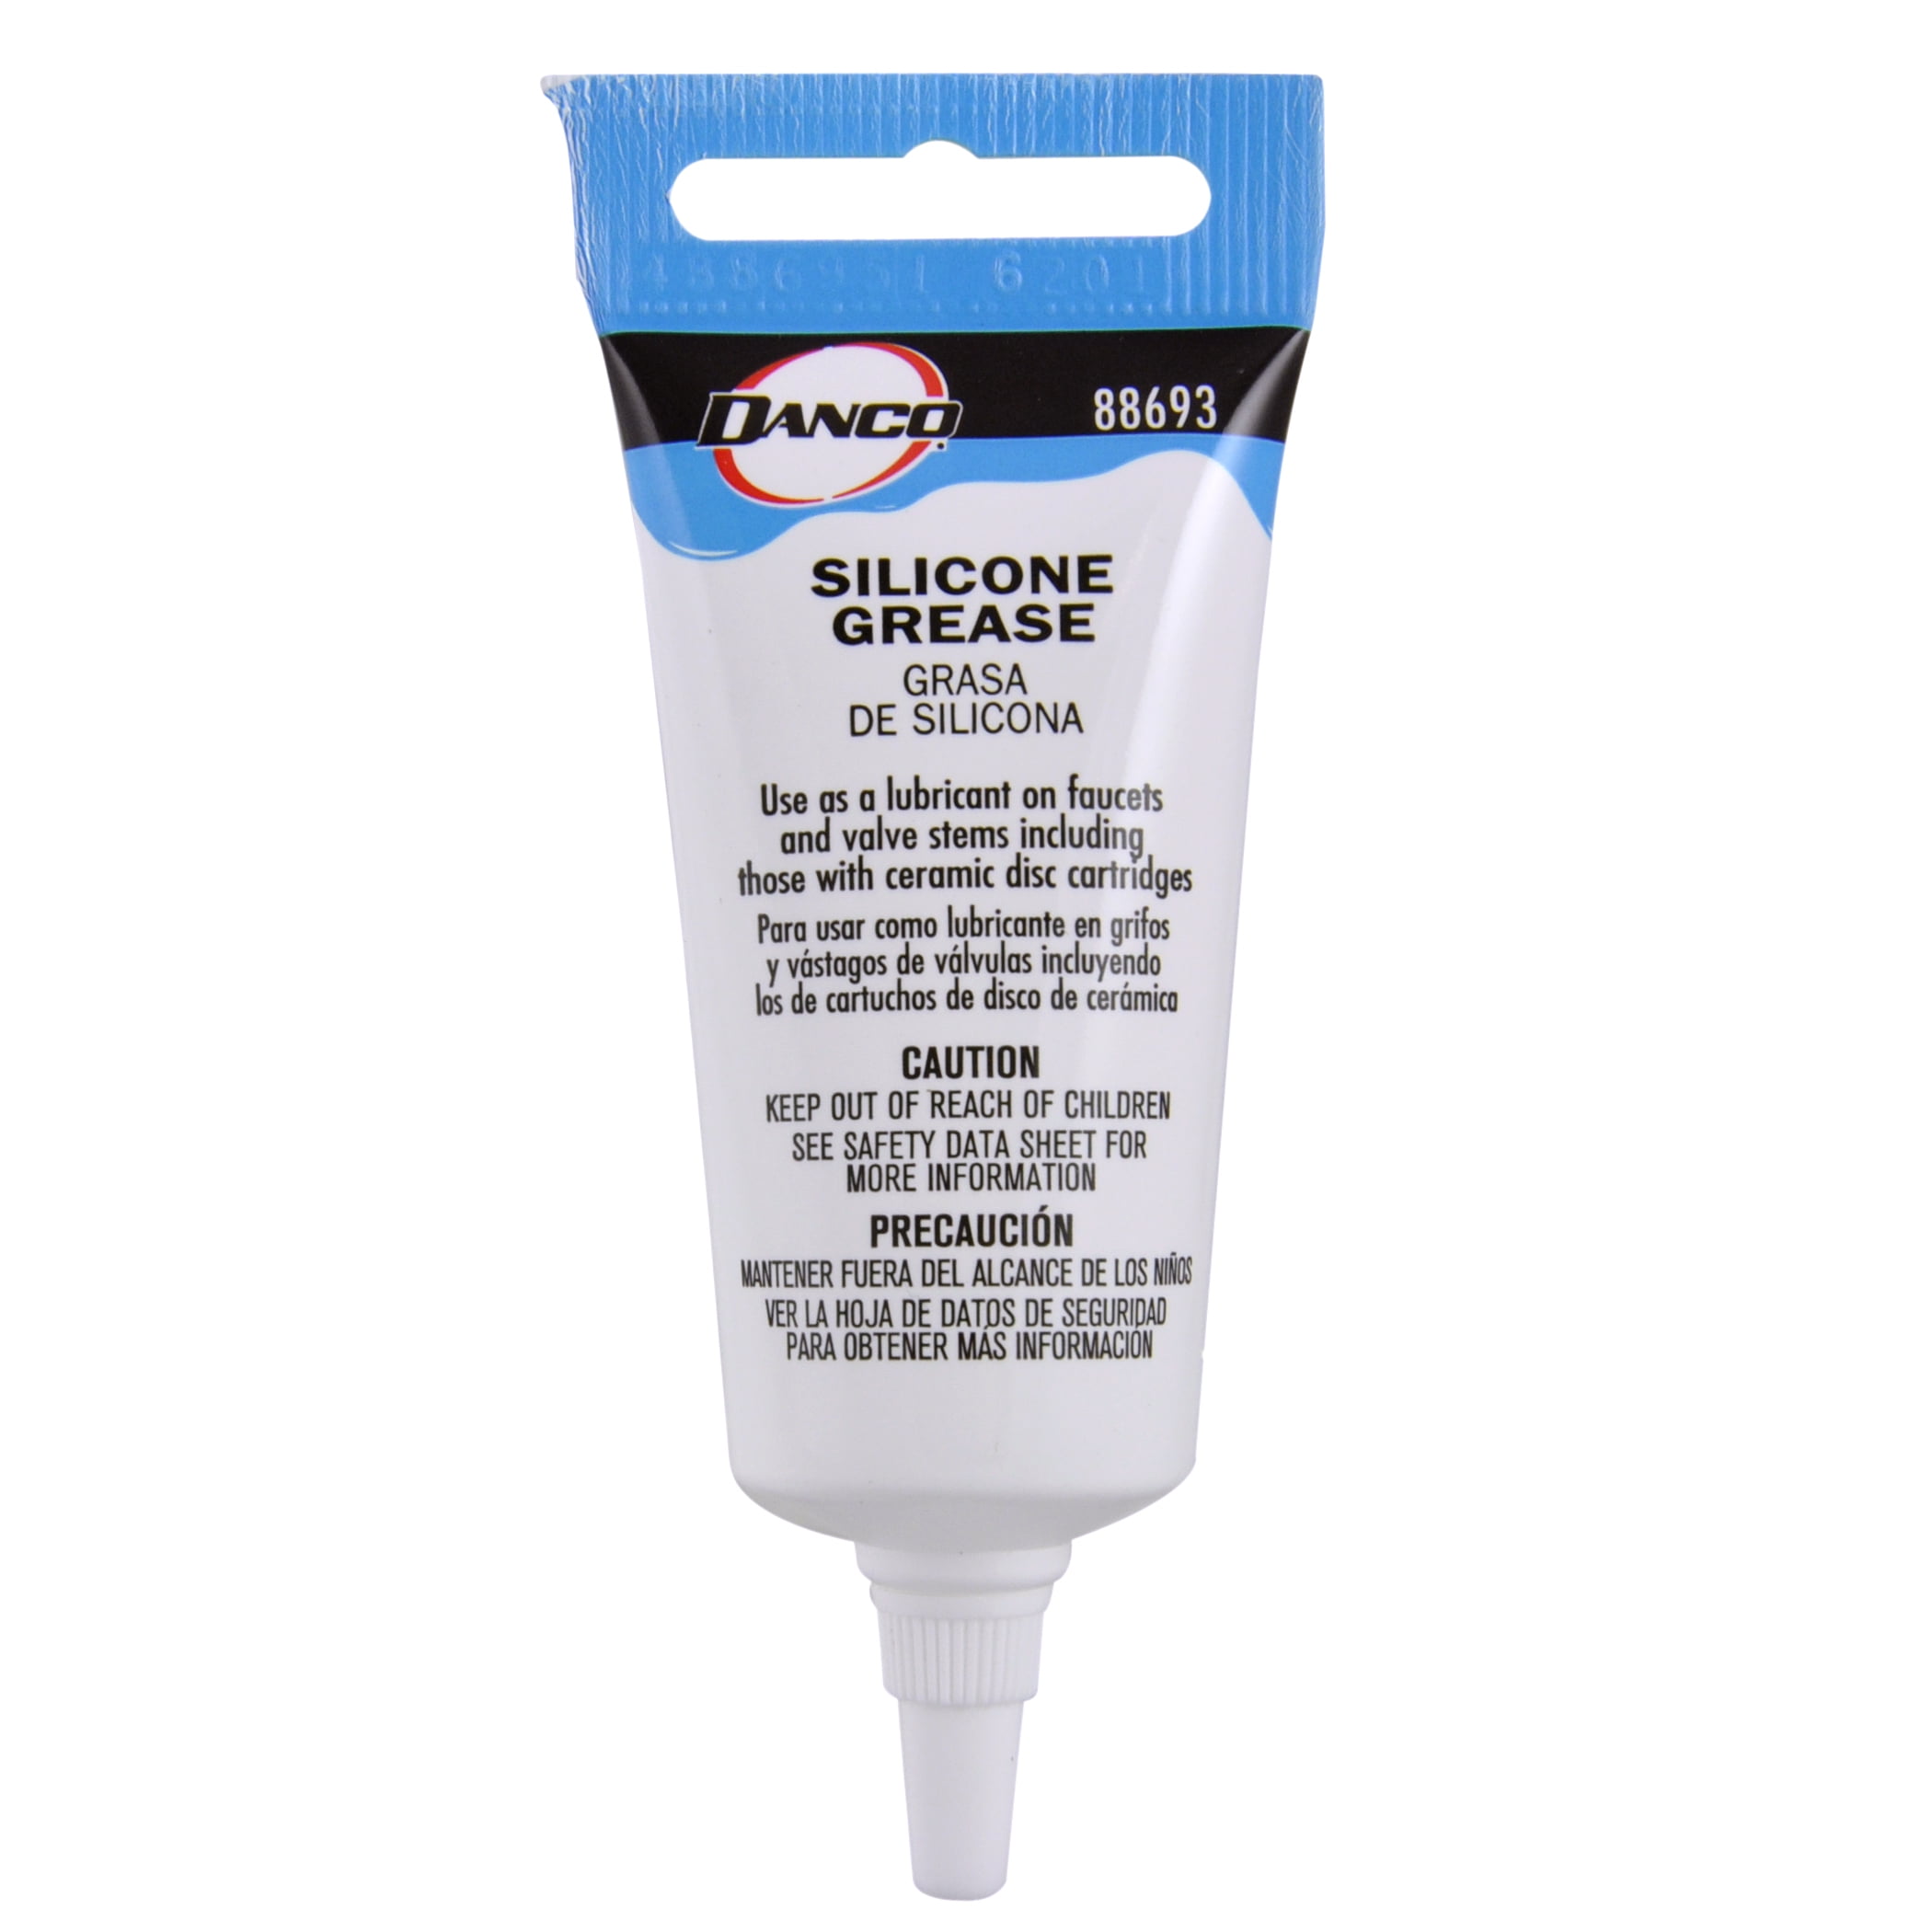 Ace Faucet and Valve Plumber's Grease 1 fl. oz. #VSHE45090, 050055